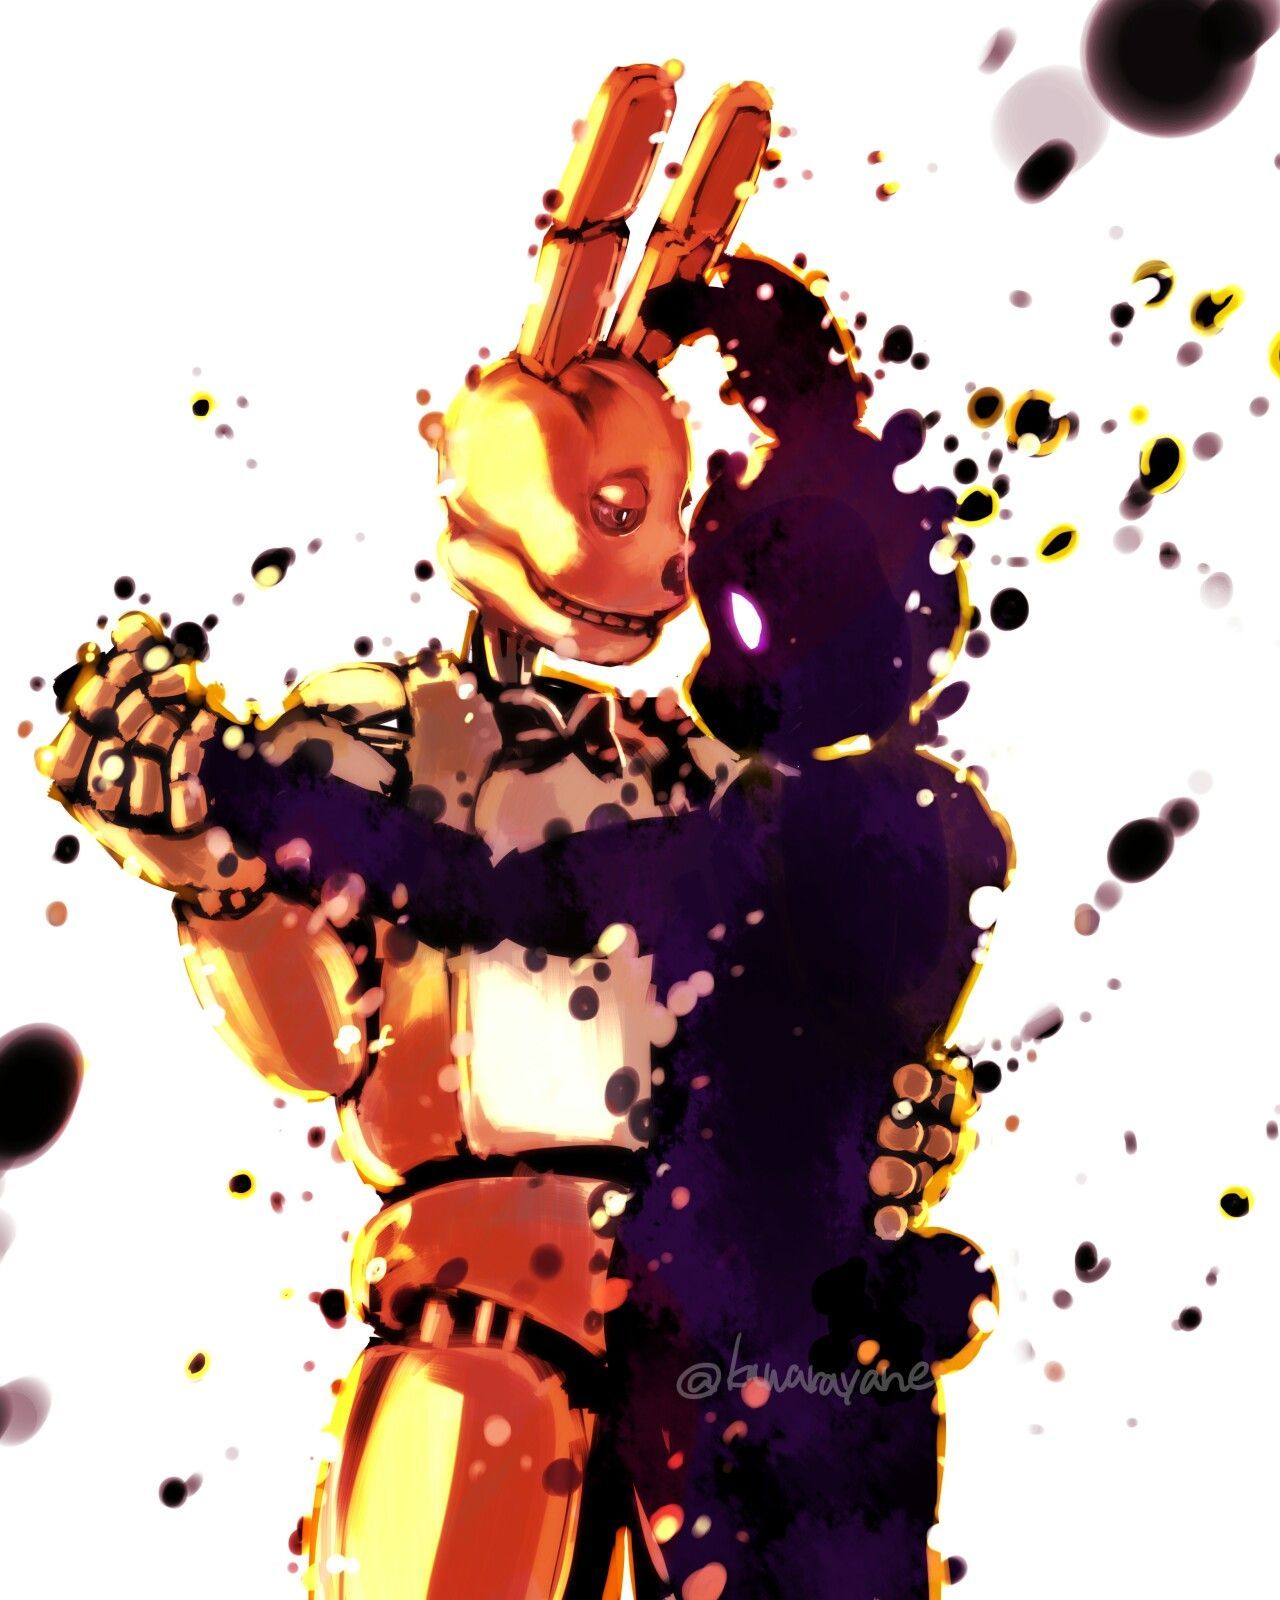 Springtrap now for 3D Dragon Ball Z compression shirts now